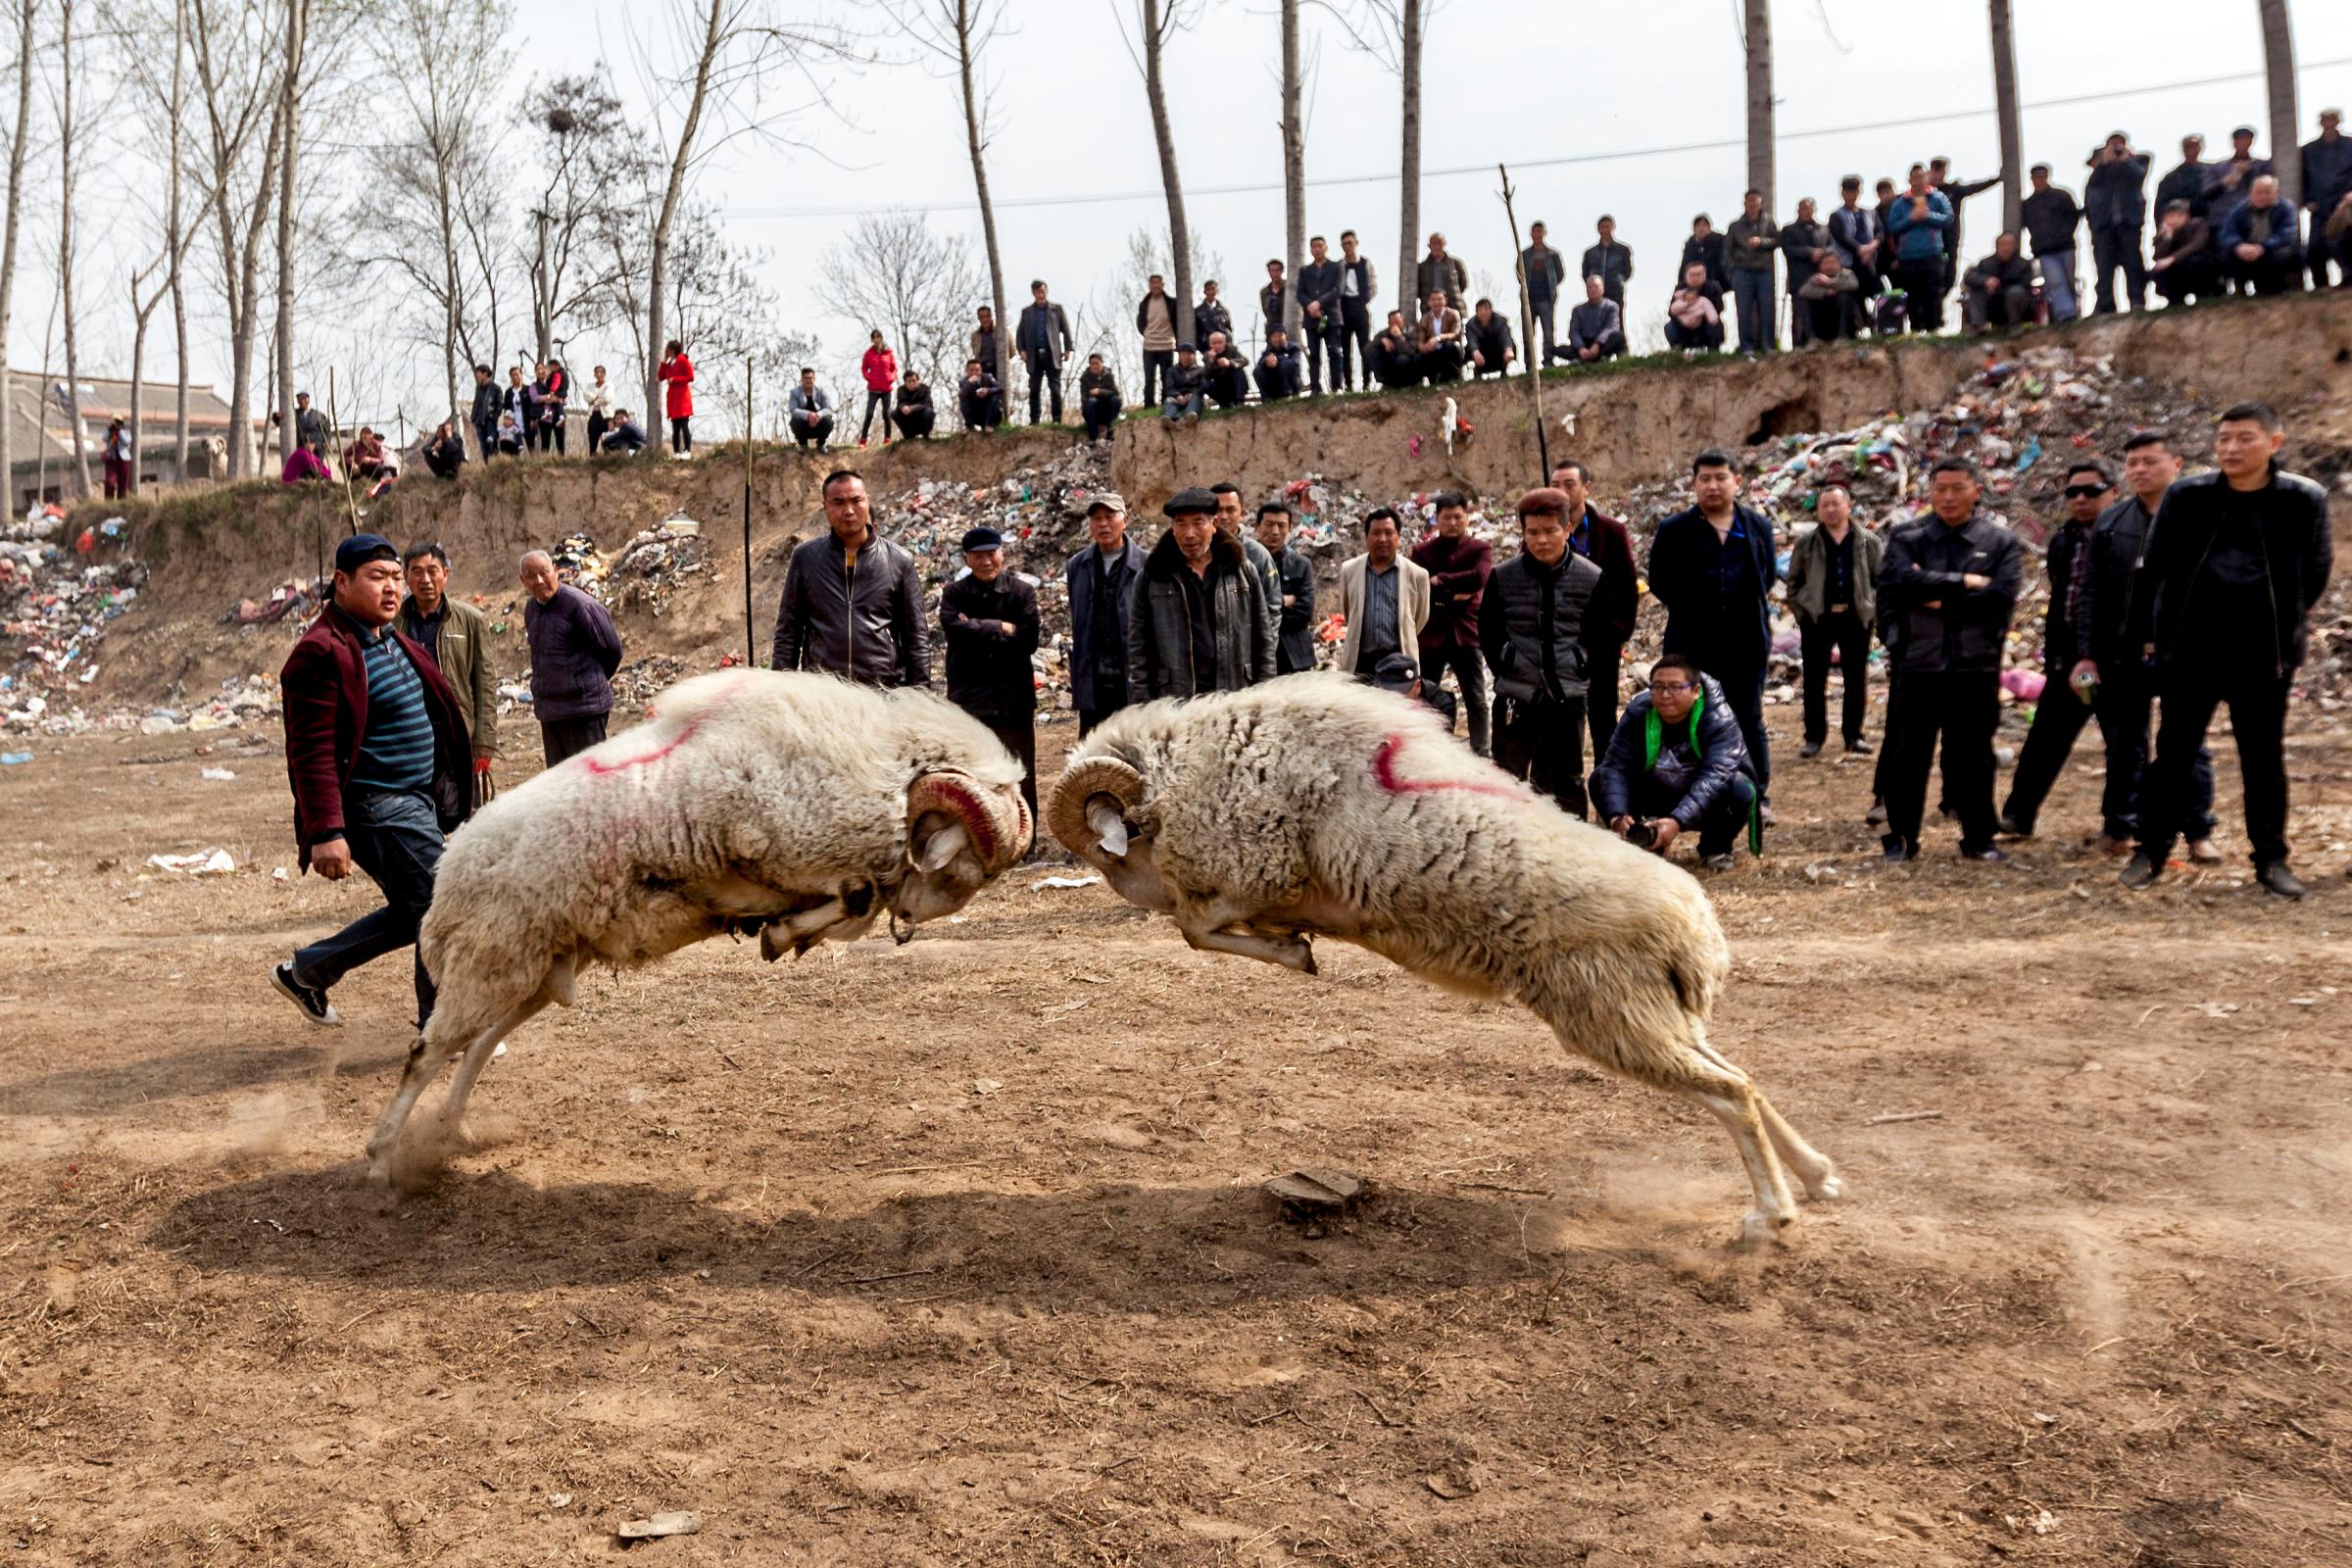 Villagers gather to watch two sheep fighting in a sheep competition during a temple fair at Lihejing Village in Hua County, China, on March 22, 2016.